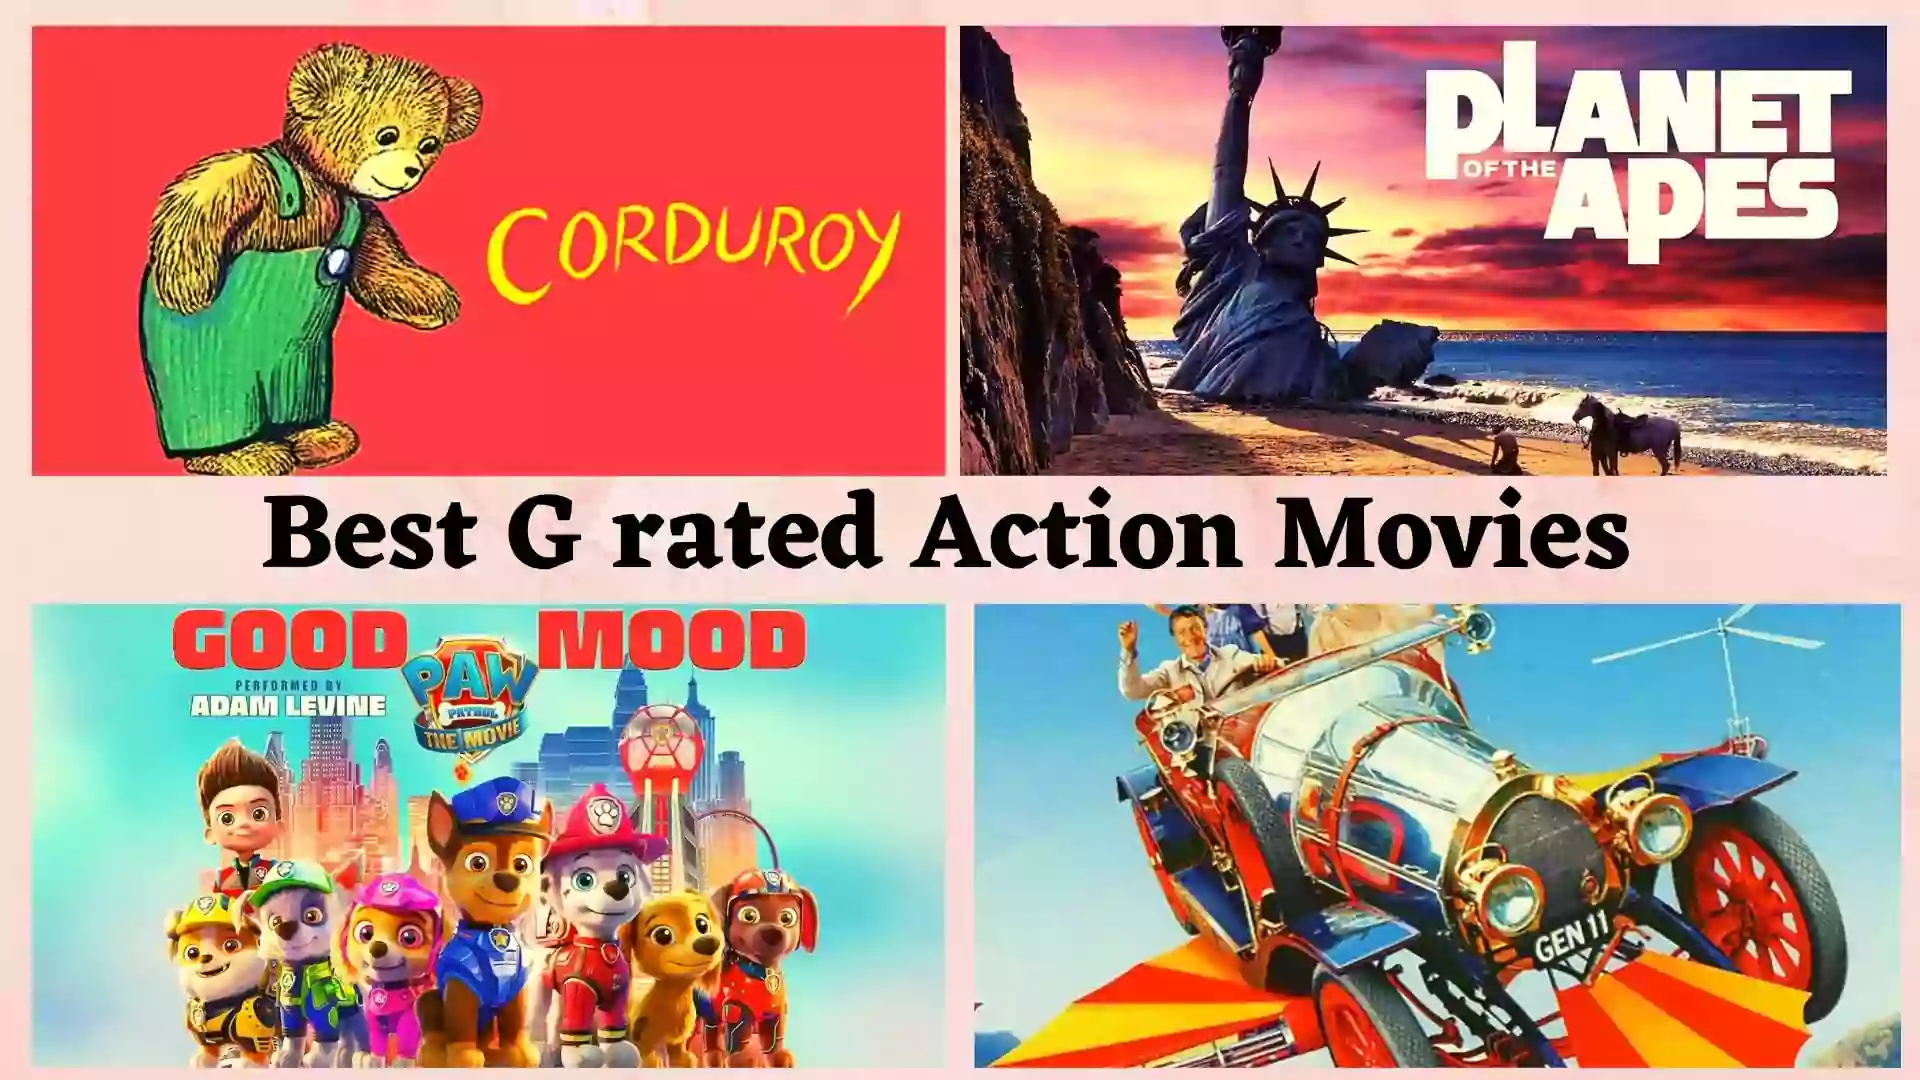 Best G rated Action Movies